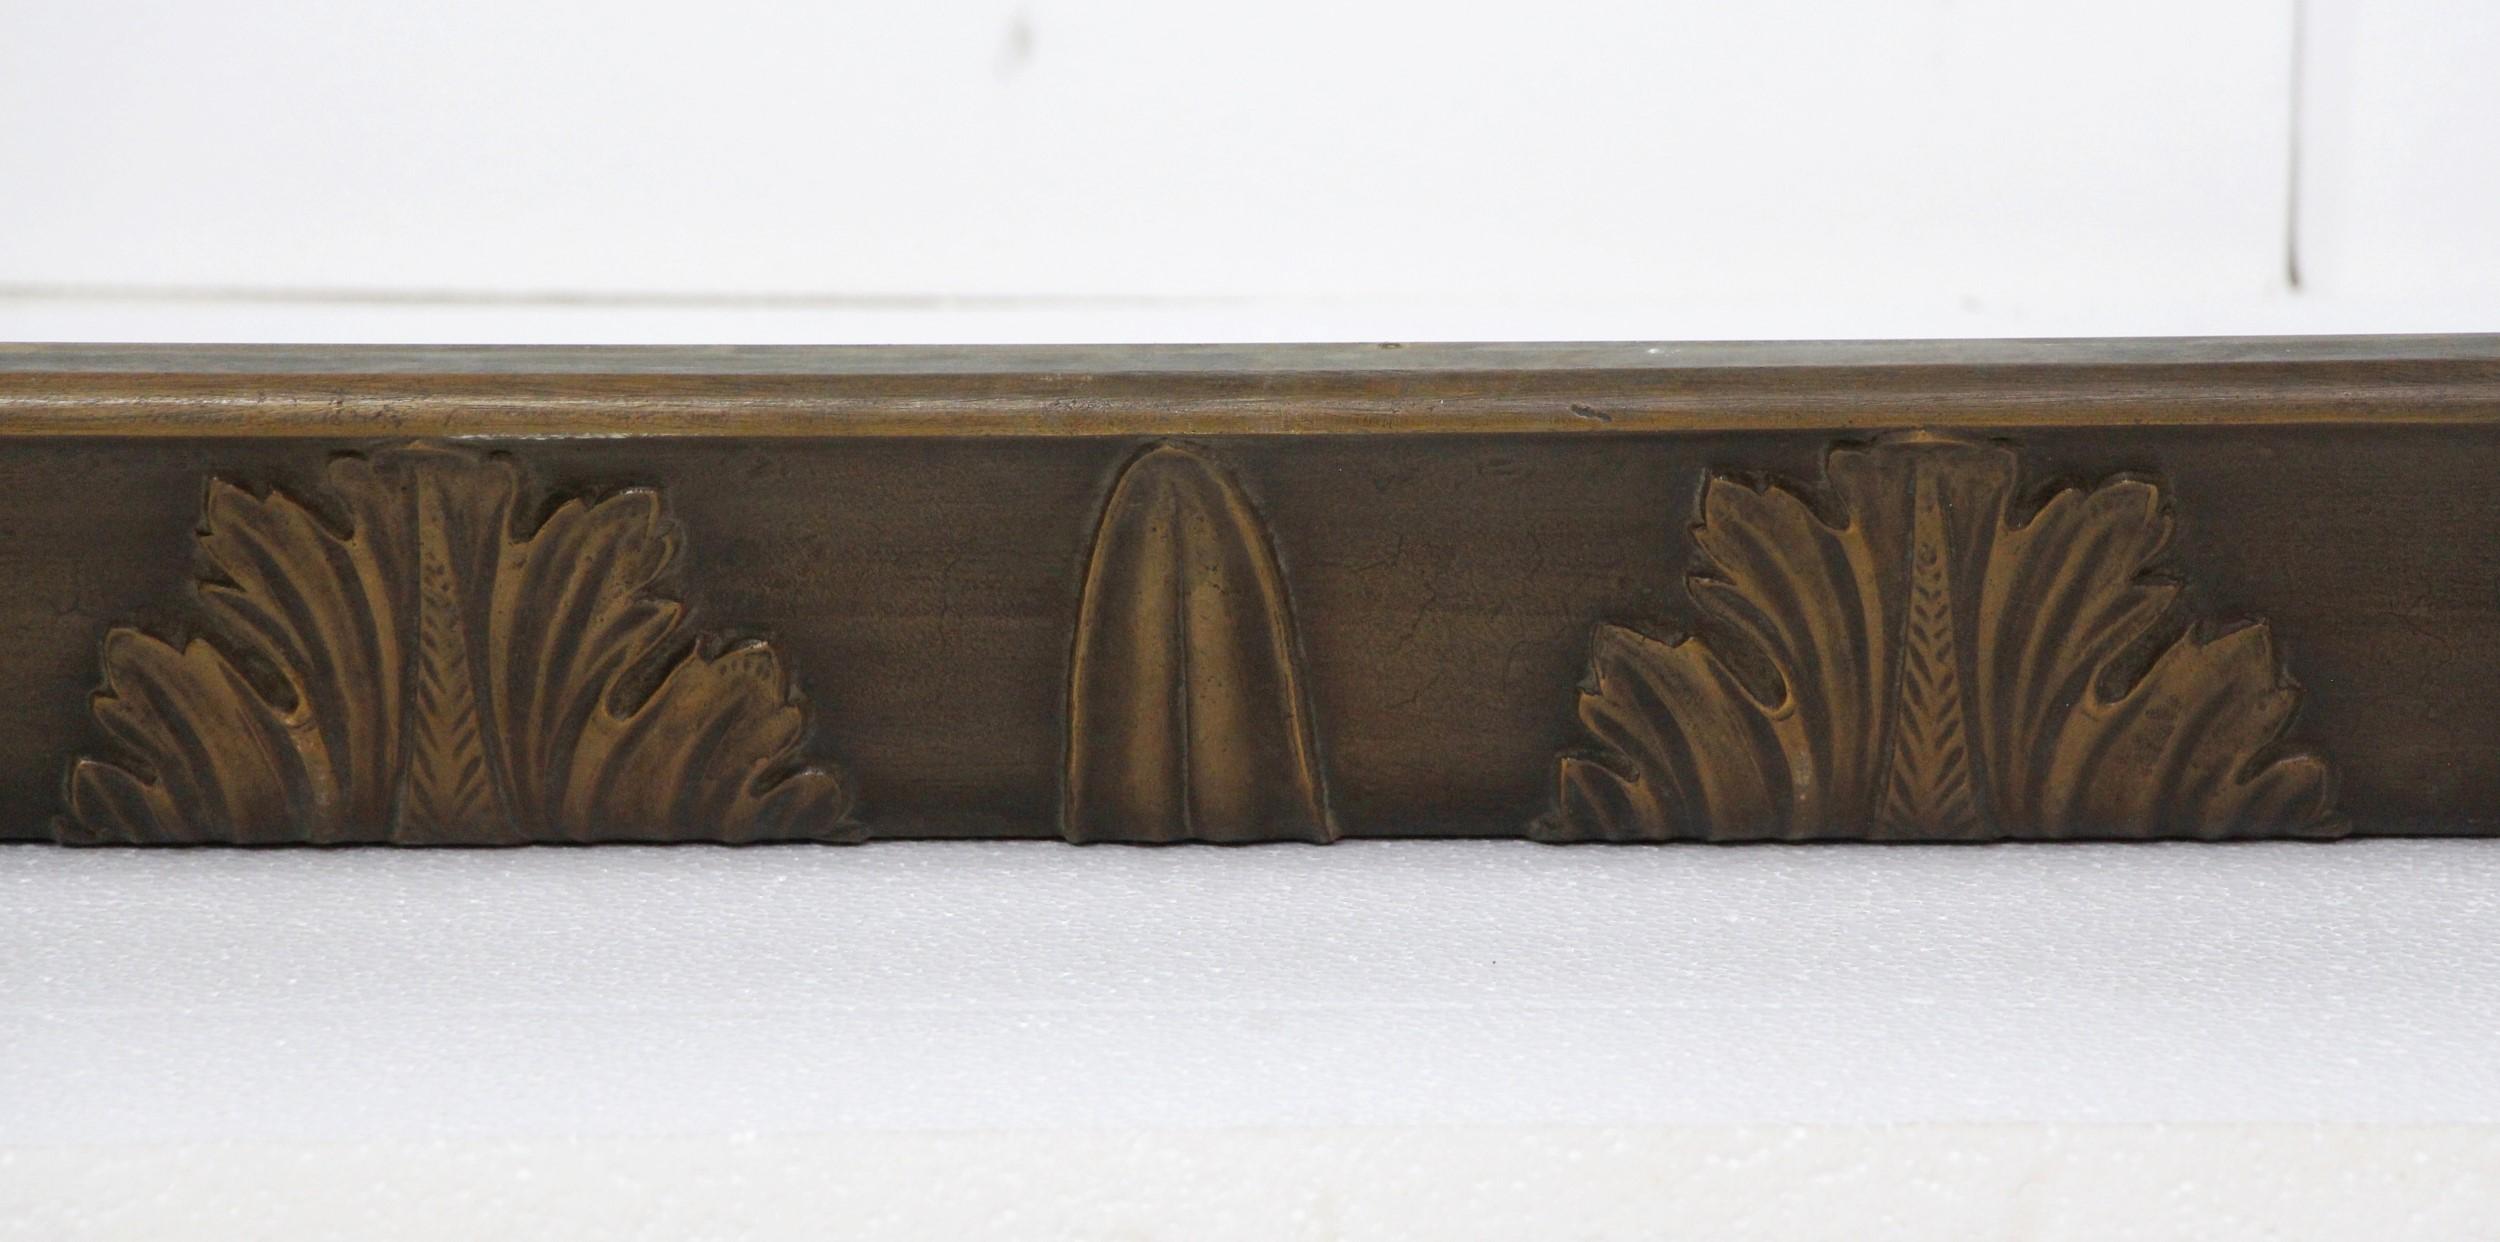 Early 20th Century antique cast bronze trim featuring ornate floral details and original dark antique patina. This can be seen at our 400 Gilligan St location in Scranton, PA.